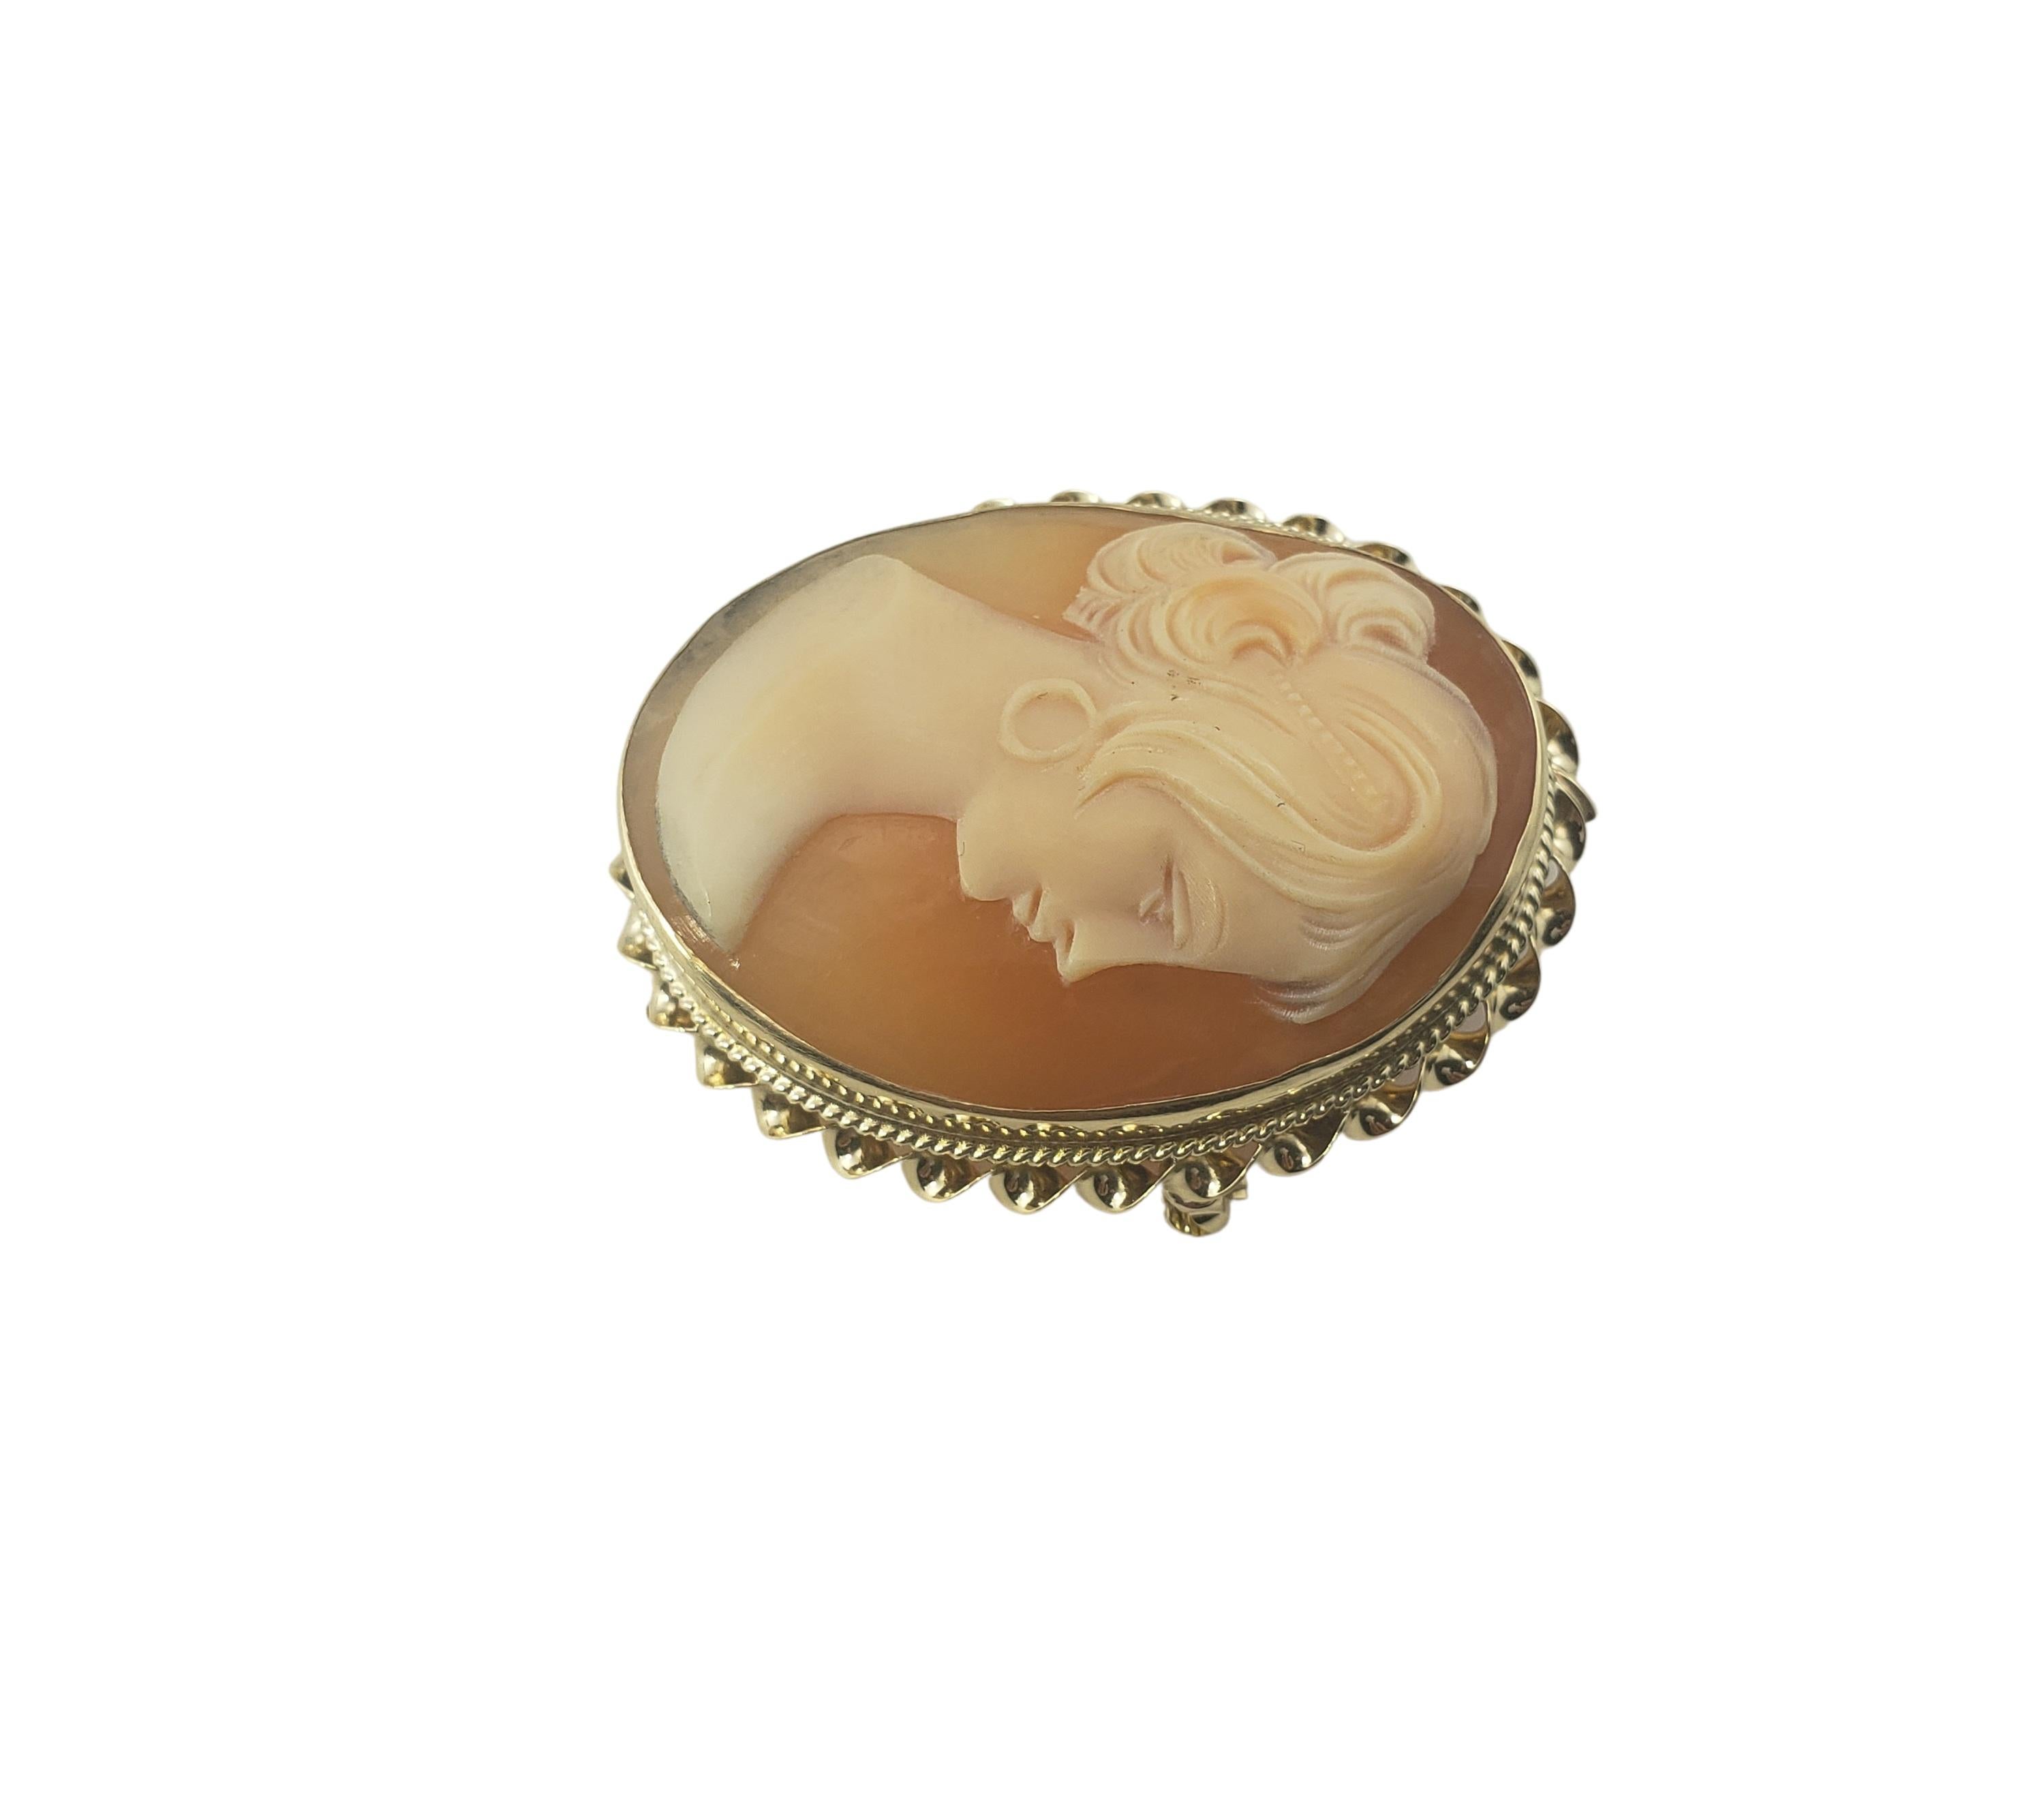 14 Karat Yellow Gold Cameo Brooch/Pendant-

This lovely cameo features a lovely lady in profile set beautifully detailed 14K yellow gold.  Can be worn as a brooch or a pendant.

Size:  29 mm x 20 mm

Weight:   4.5 dwt. /   7.1 gr.

Stamped: